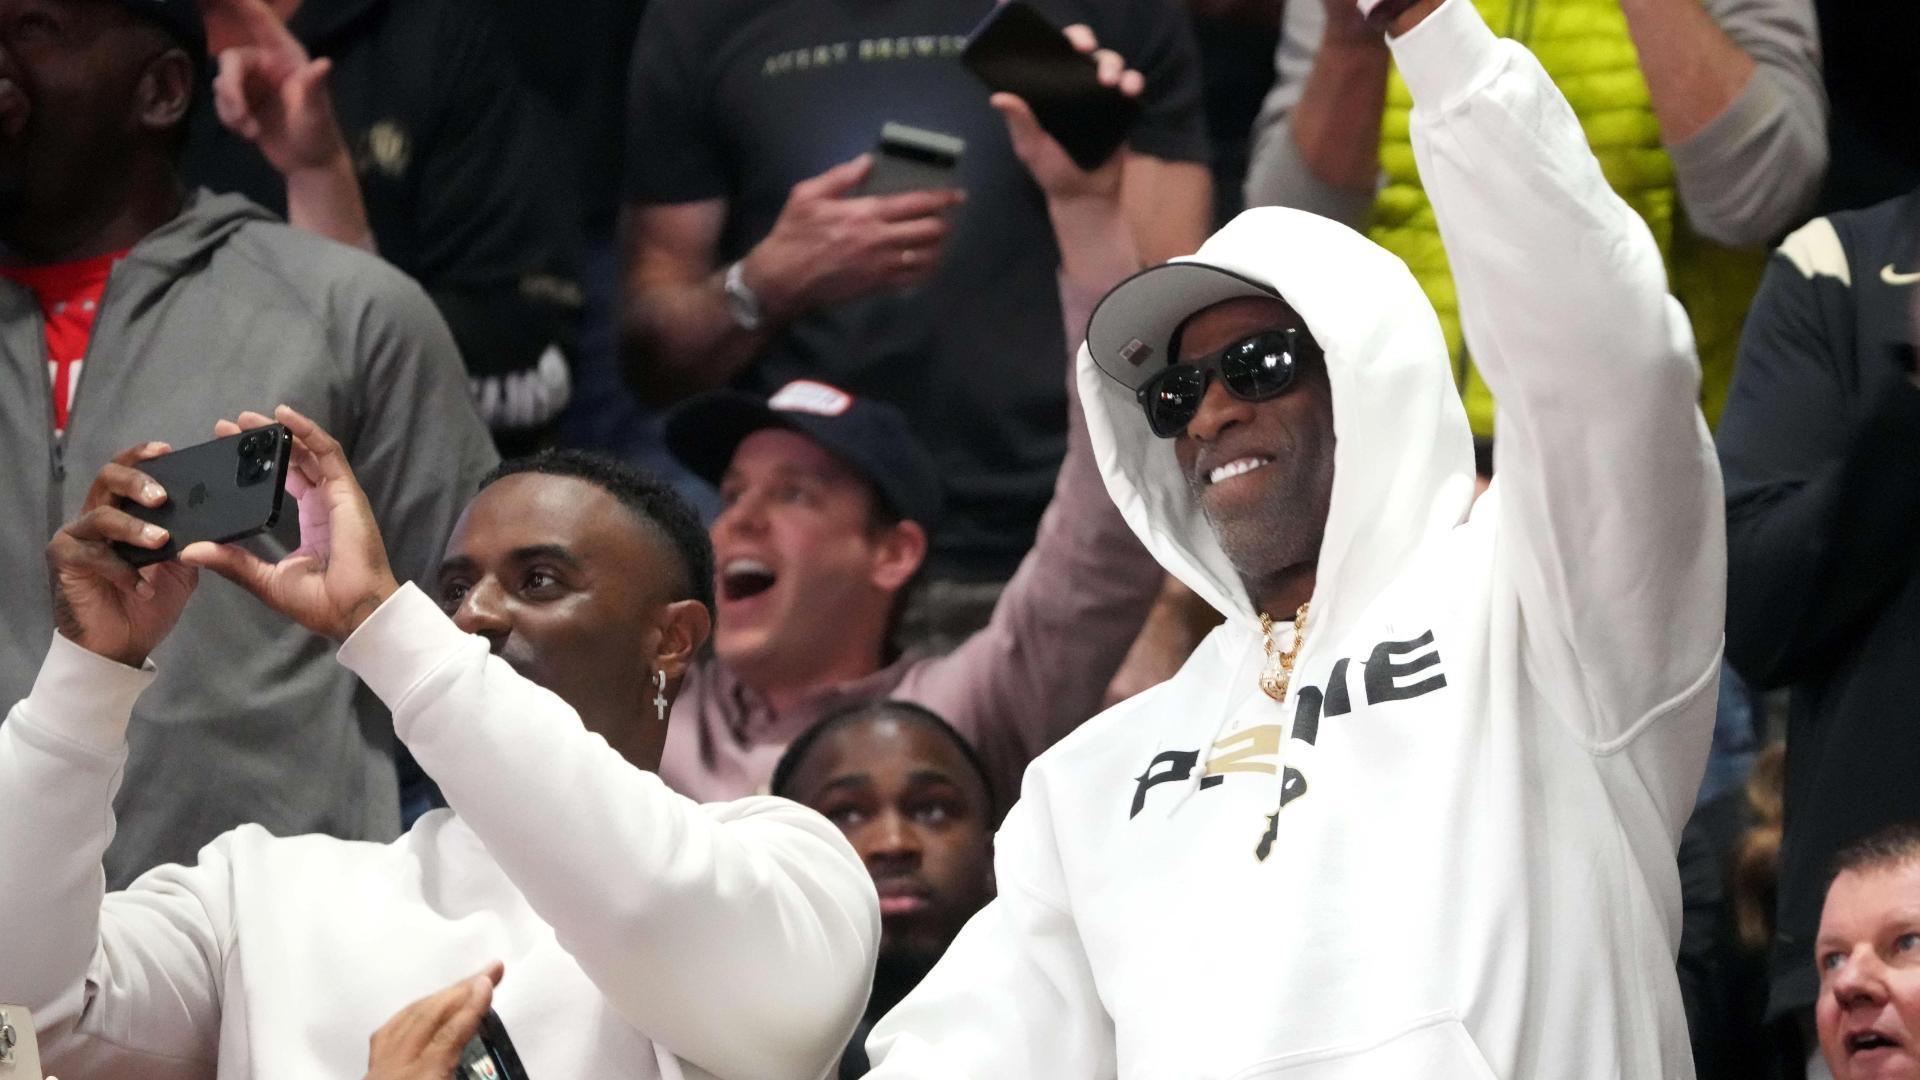 Deion gets rousing ovation from fans at Colorado basketball game